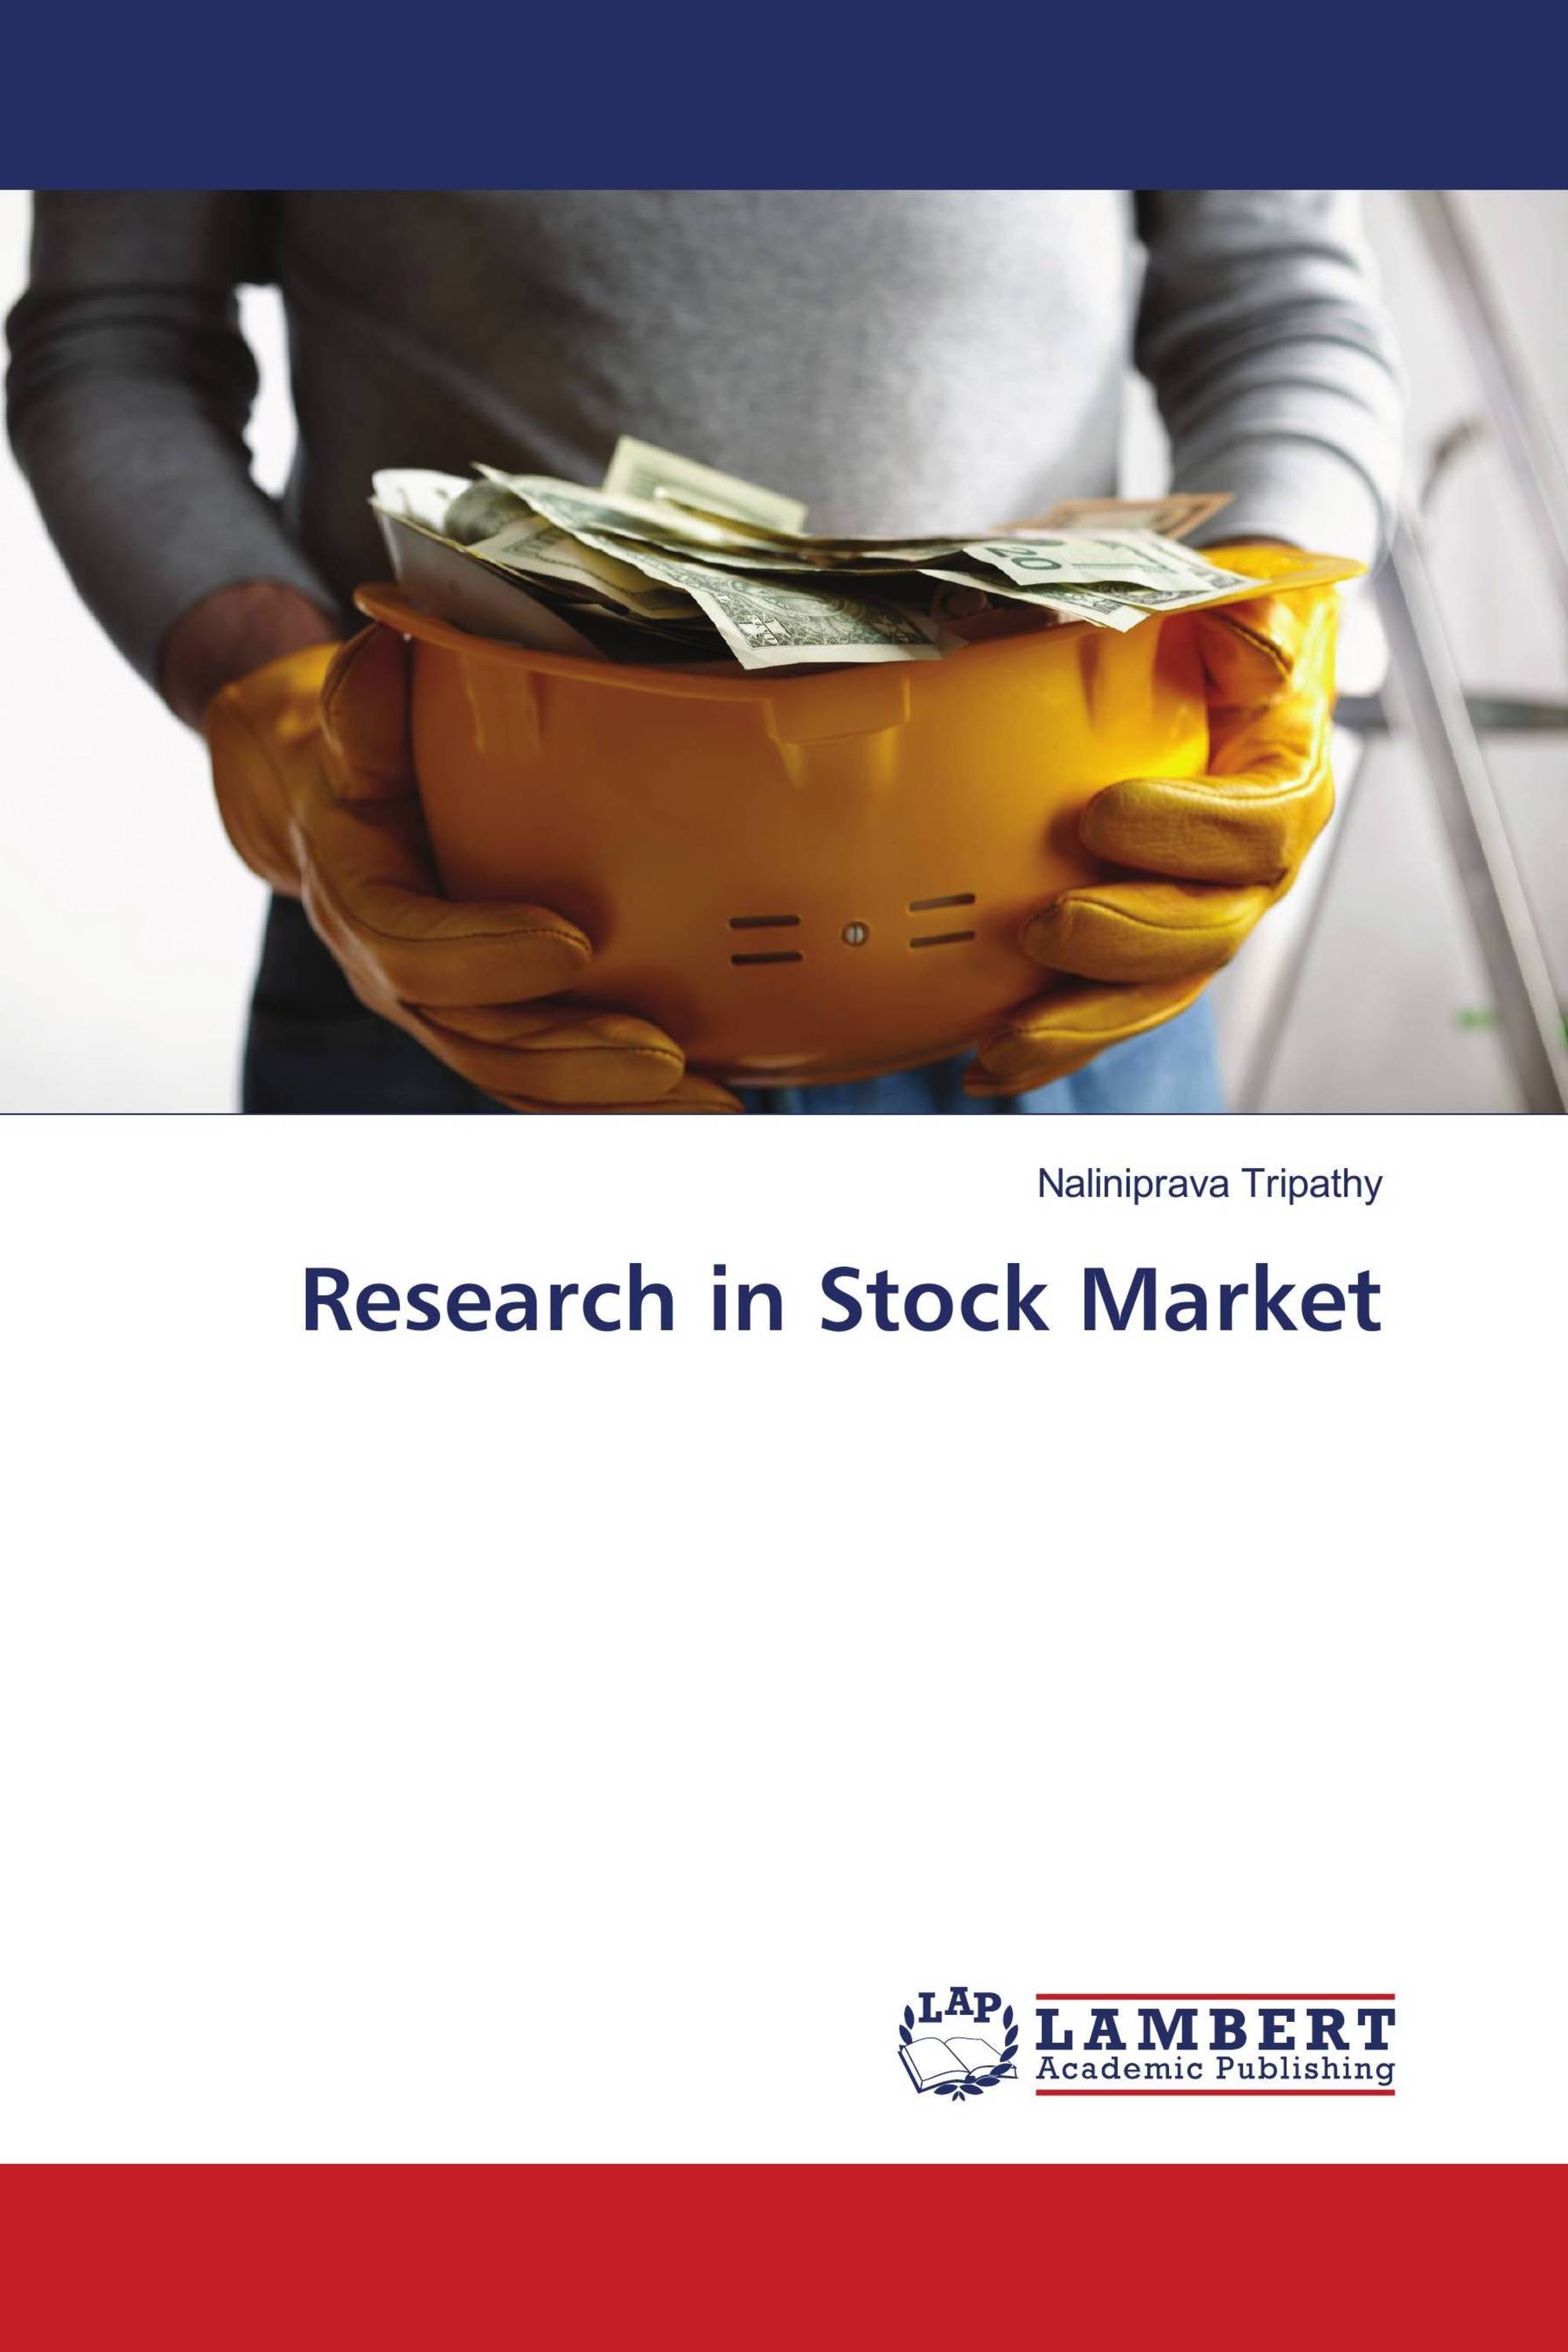 introduction to stock market research paper